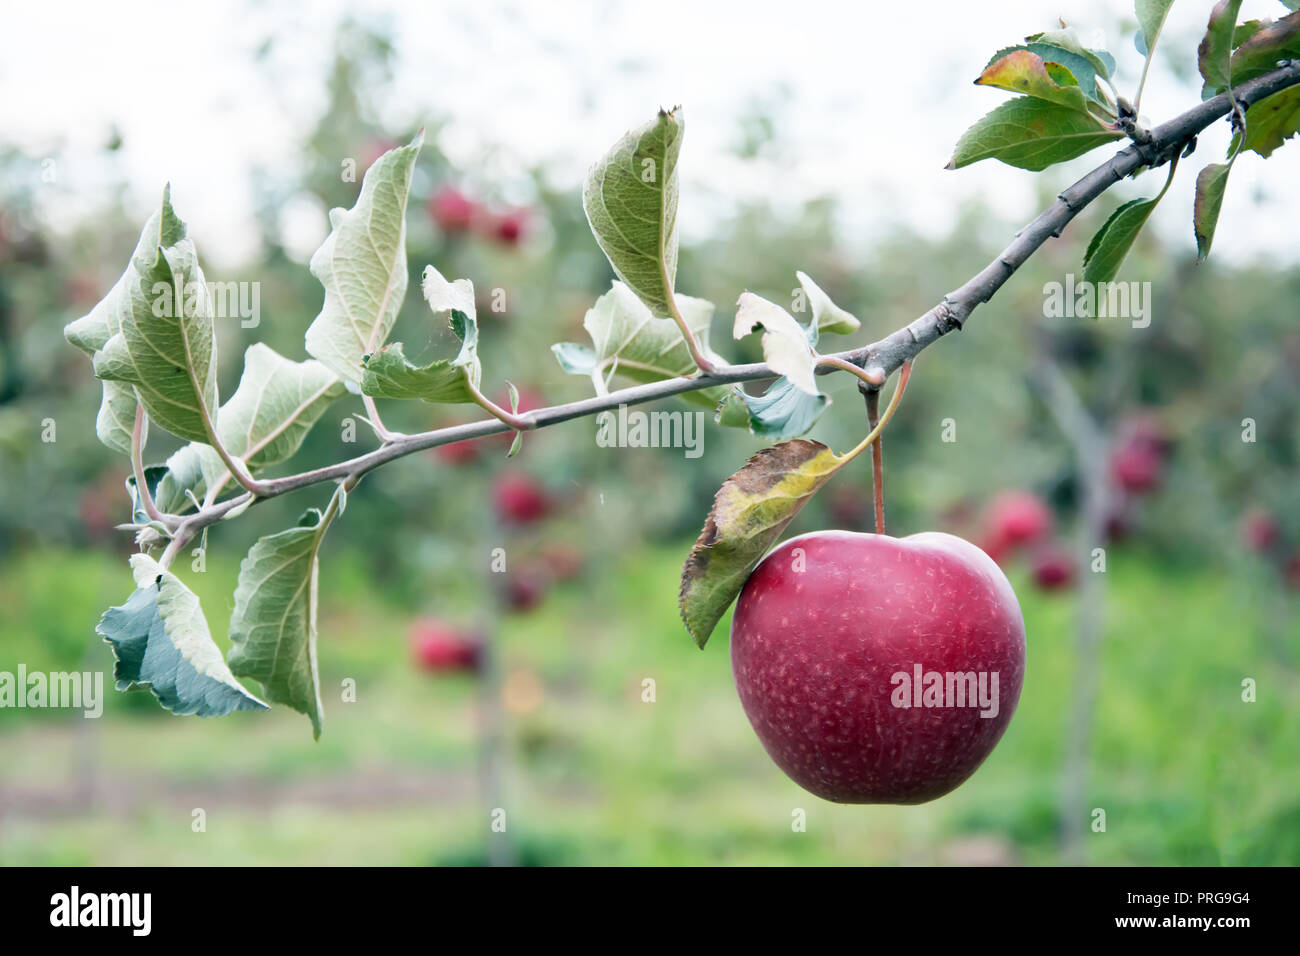 One big, ripe, red apple hanging on a twig of a small apple tree, other apple trees visible at the background Stock Photo